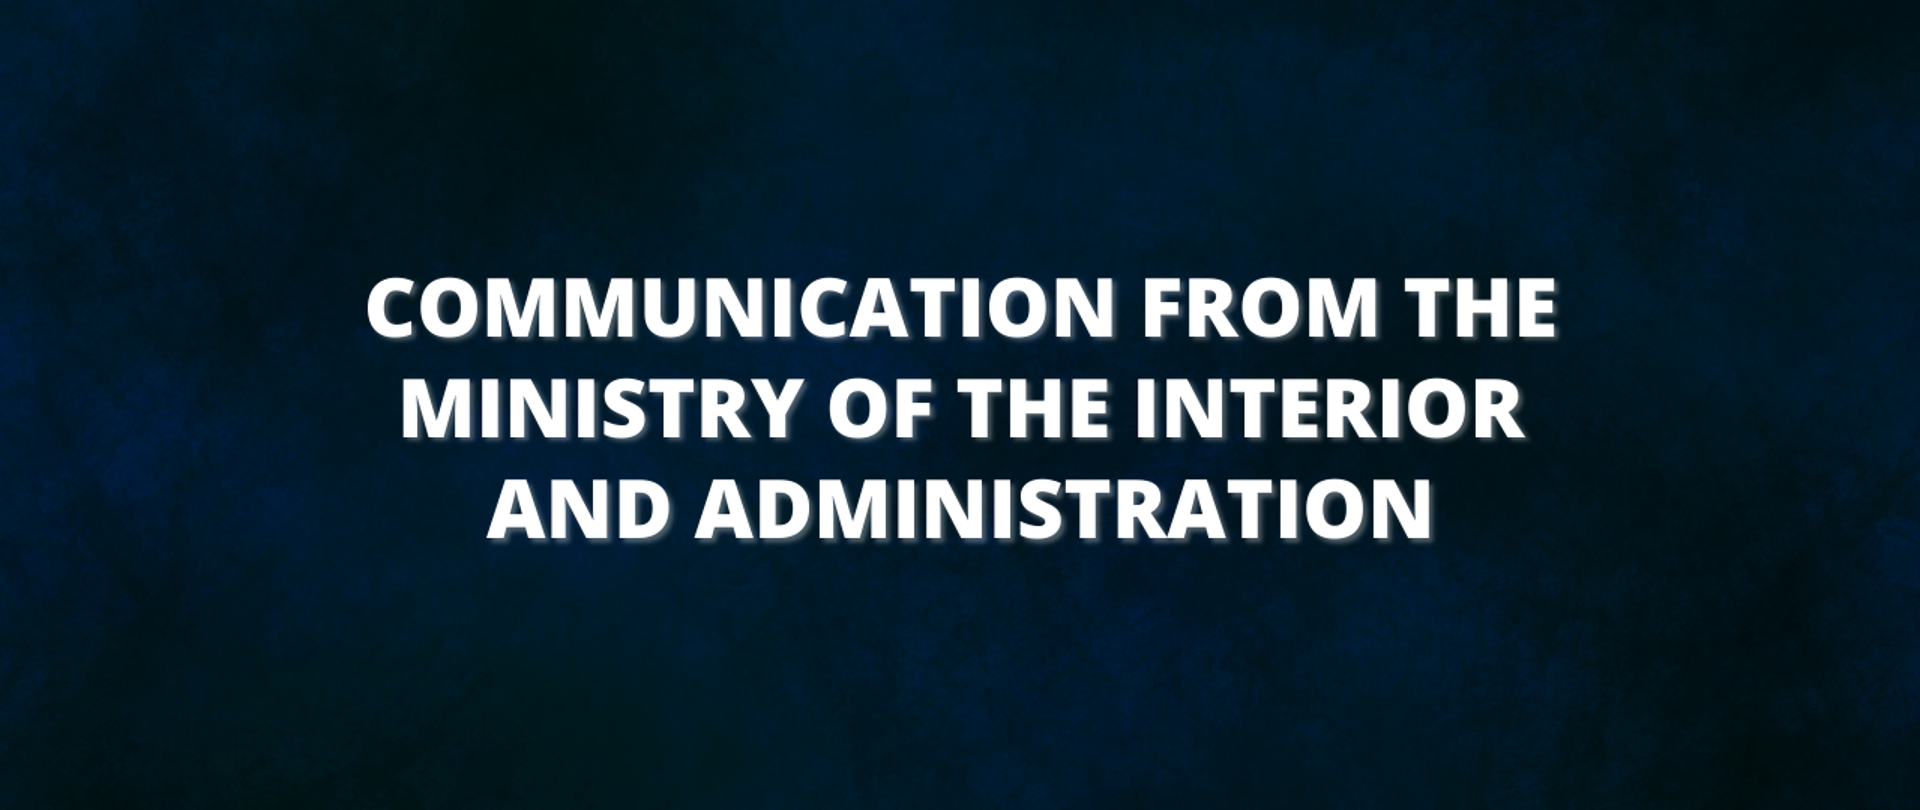 Communication from the Ministry of the Interior and Administration